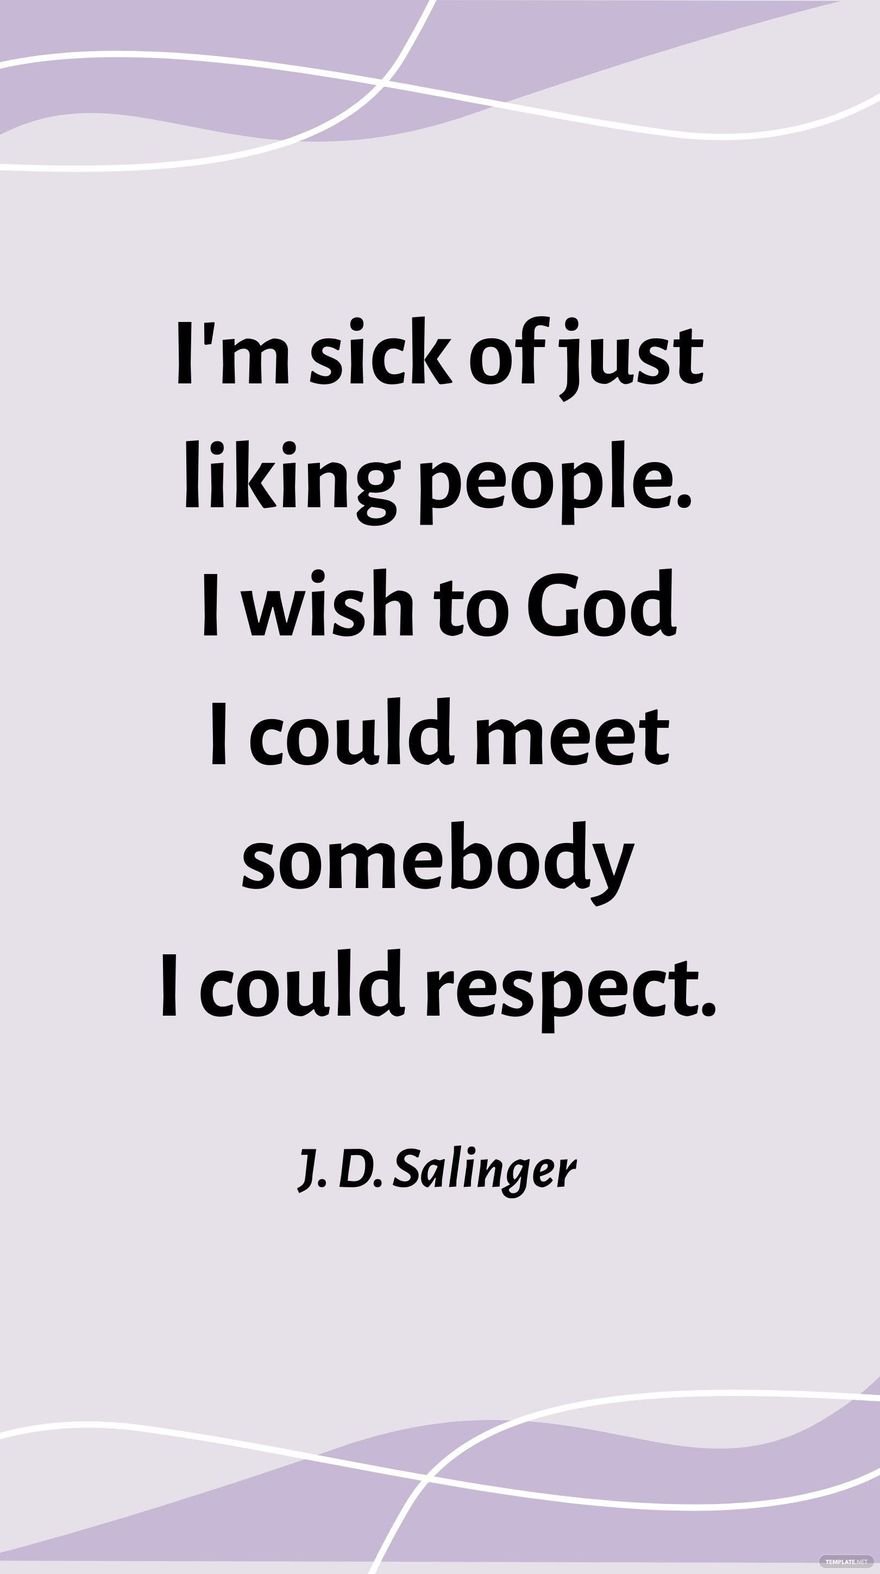 J. D. Salinger - I'm sick of just liking people. I wish to God I could meet somebody I could respect.